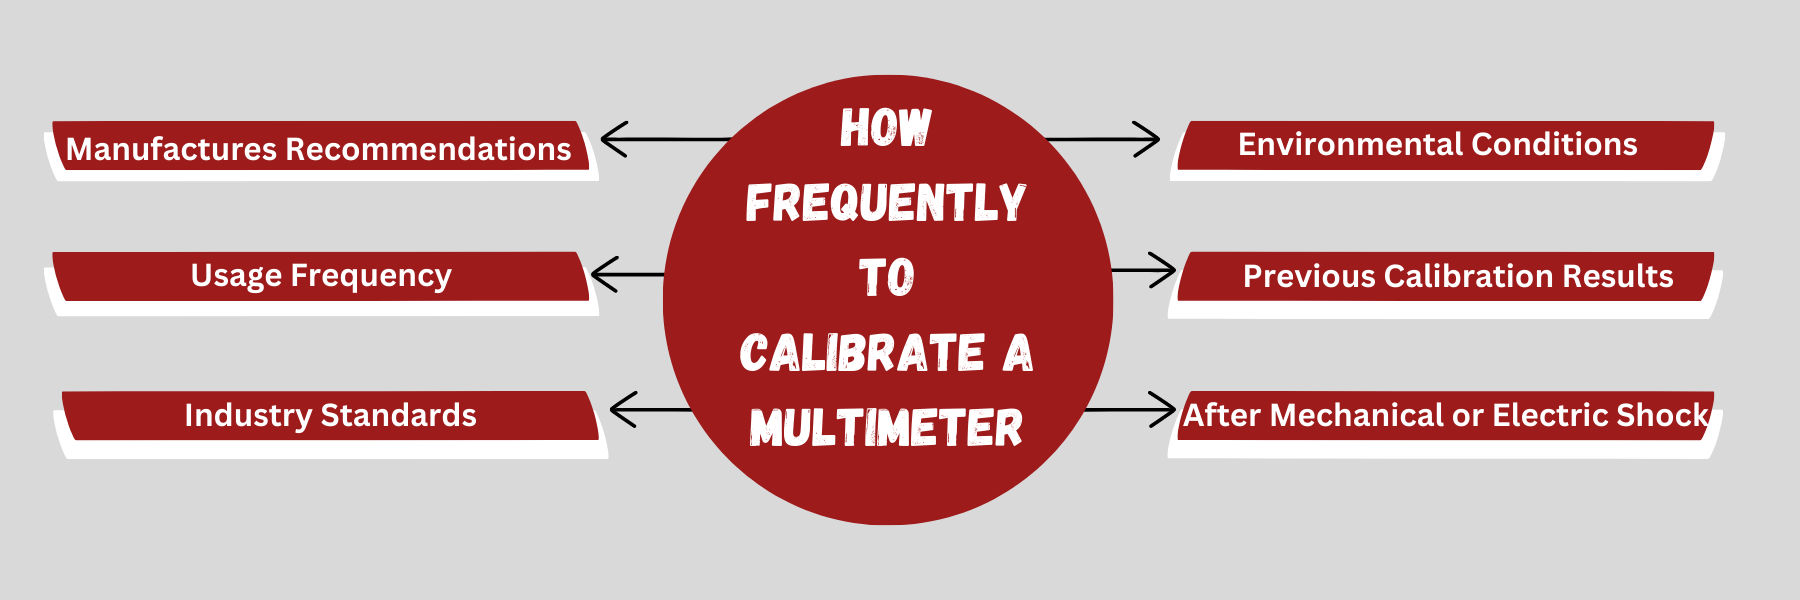 Multimeter Calibration - How Frequently to Calibrate a Multimeter